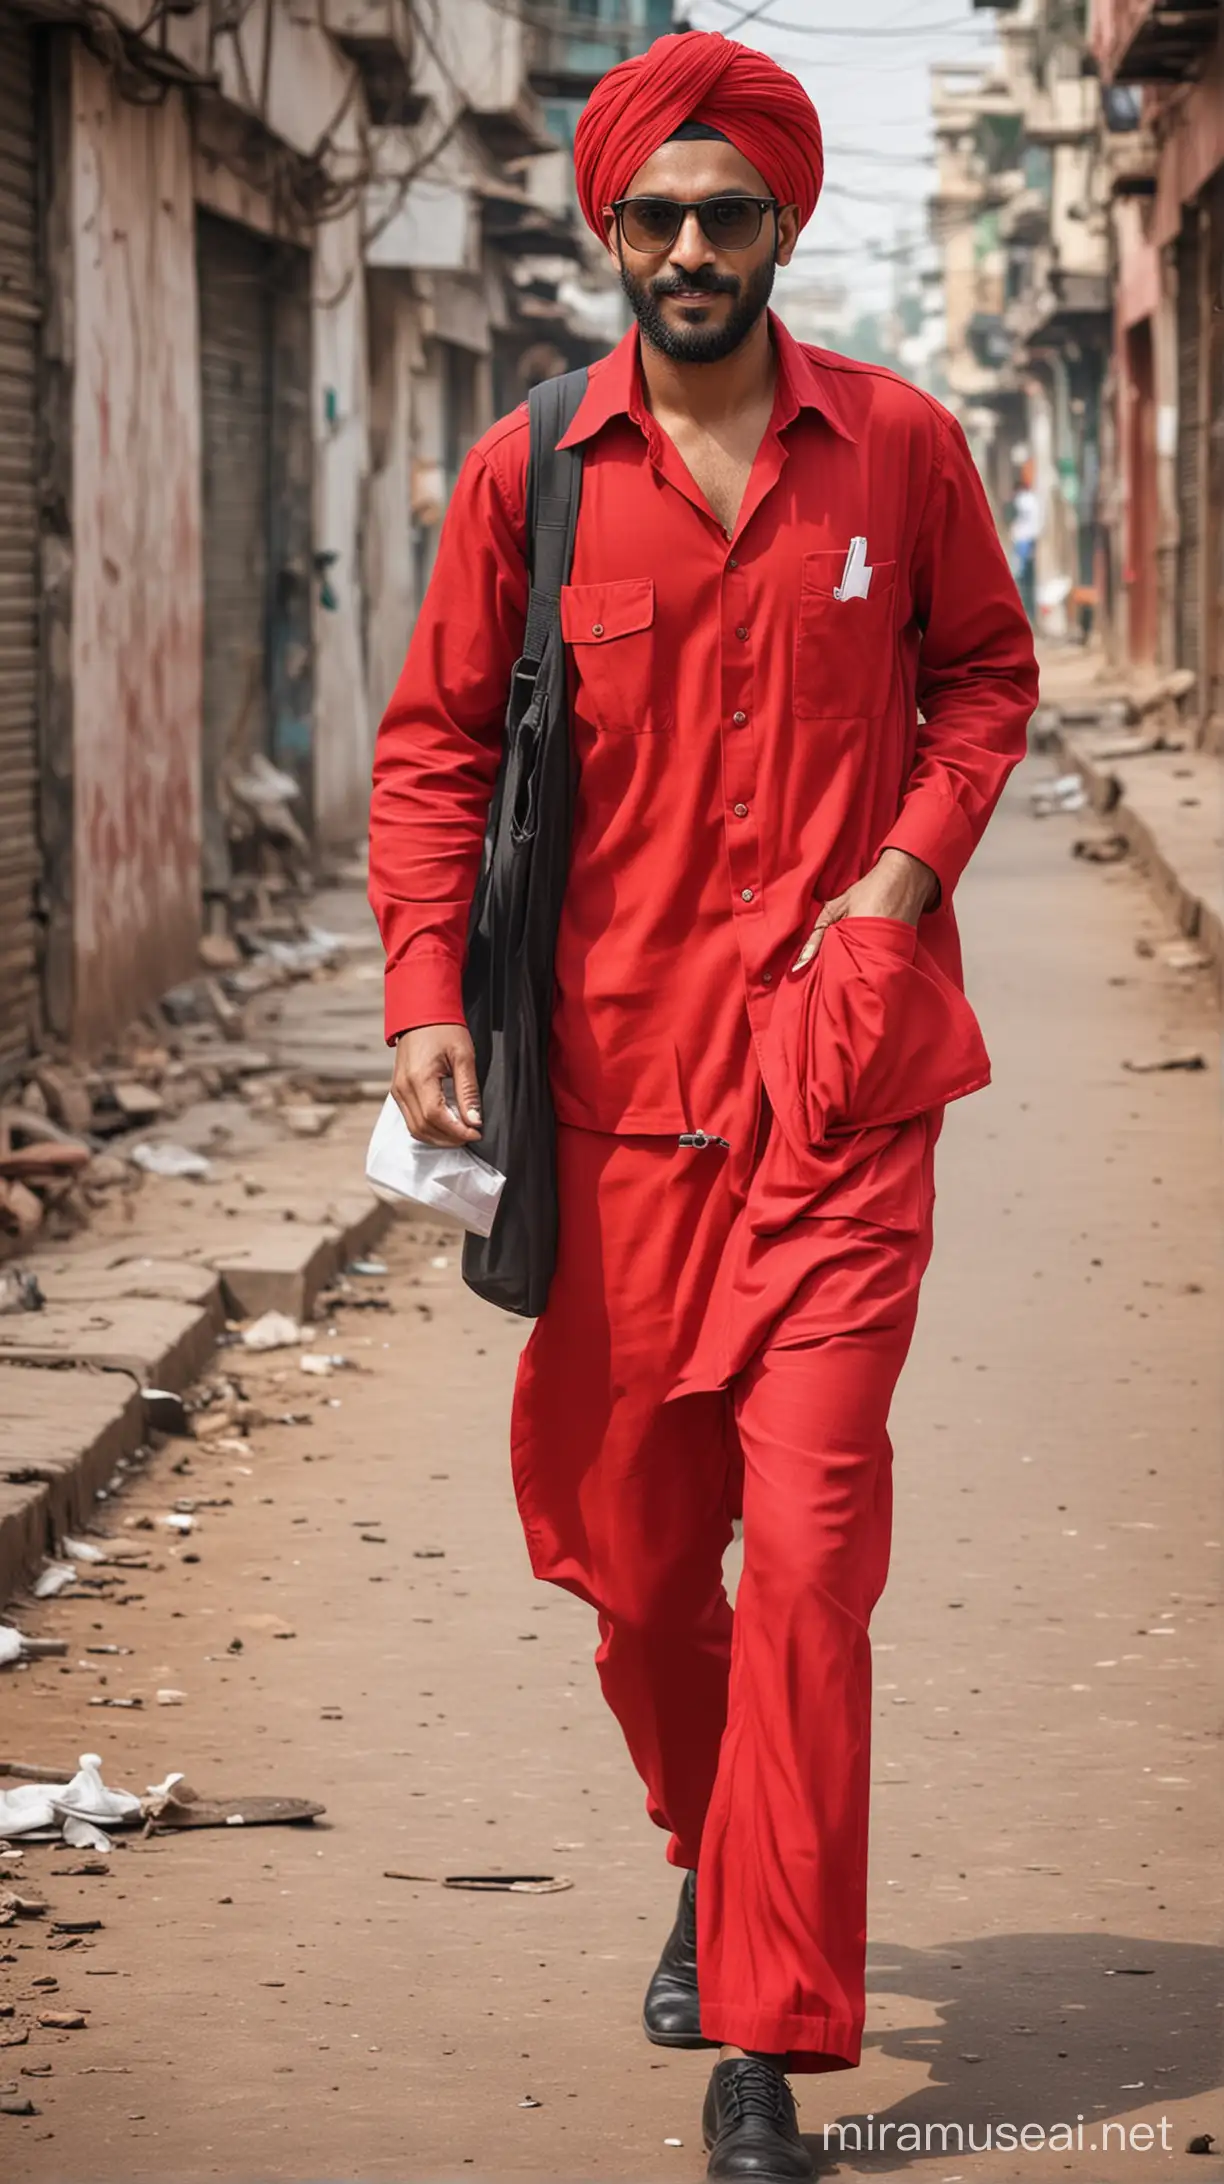 Stylish Businessman in Red Outfit Heading to Work